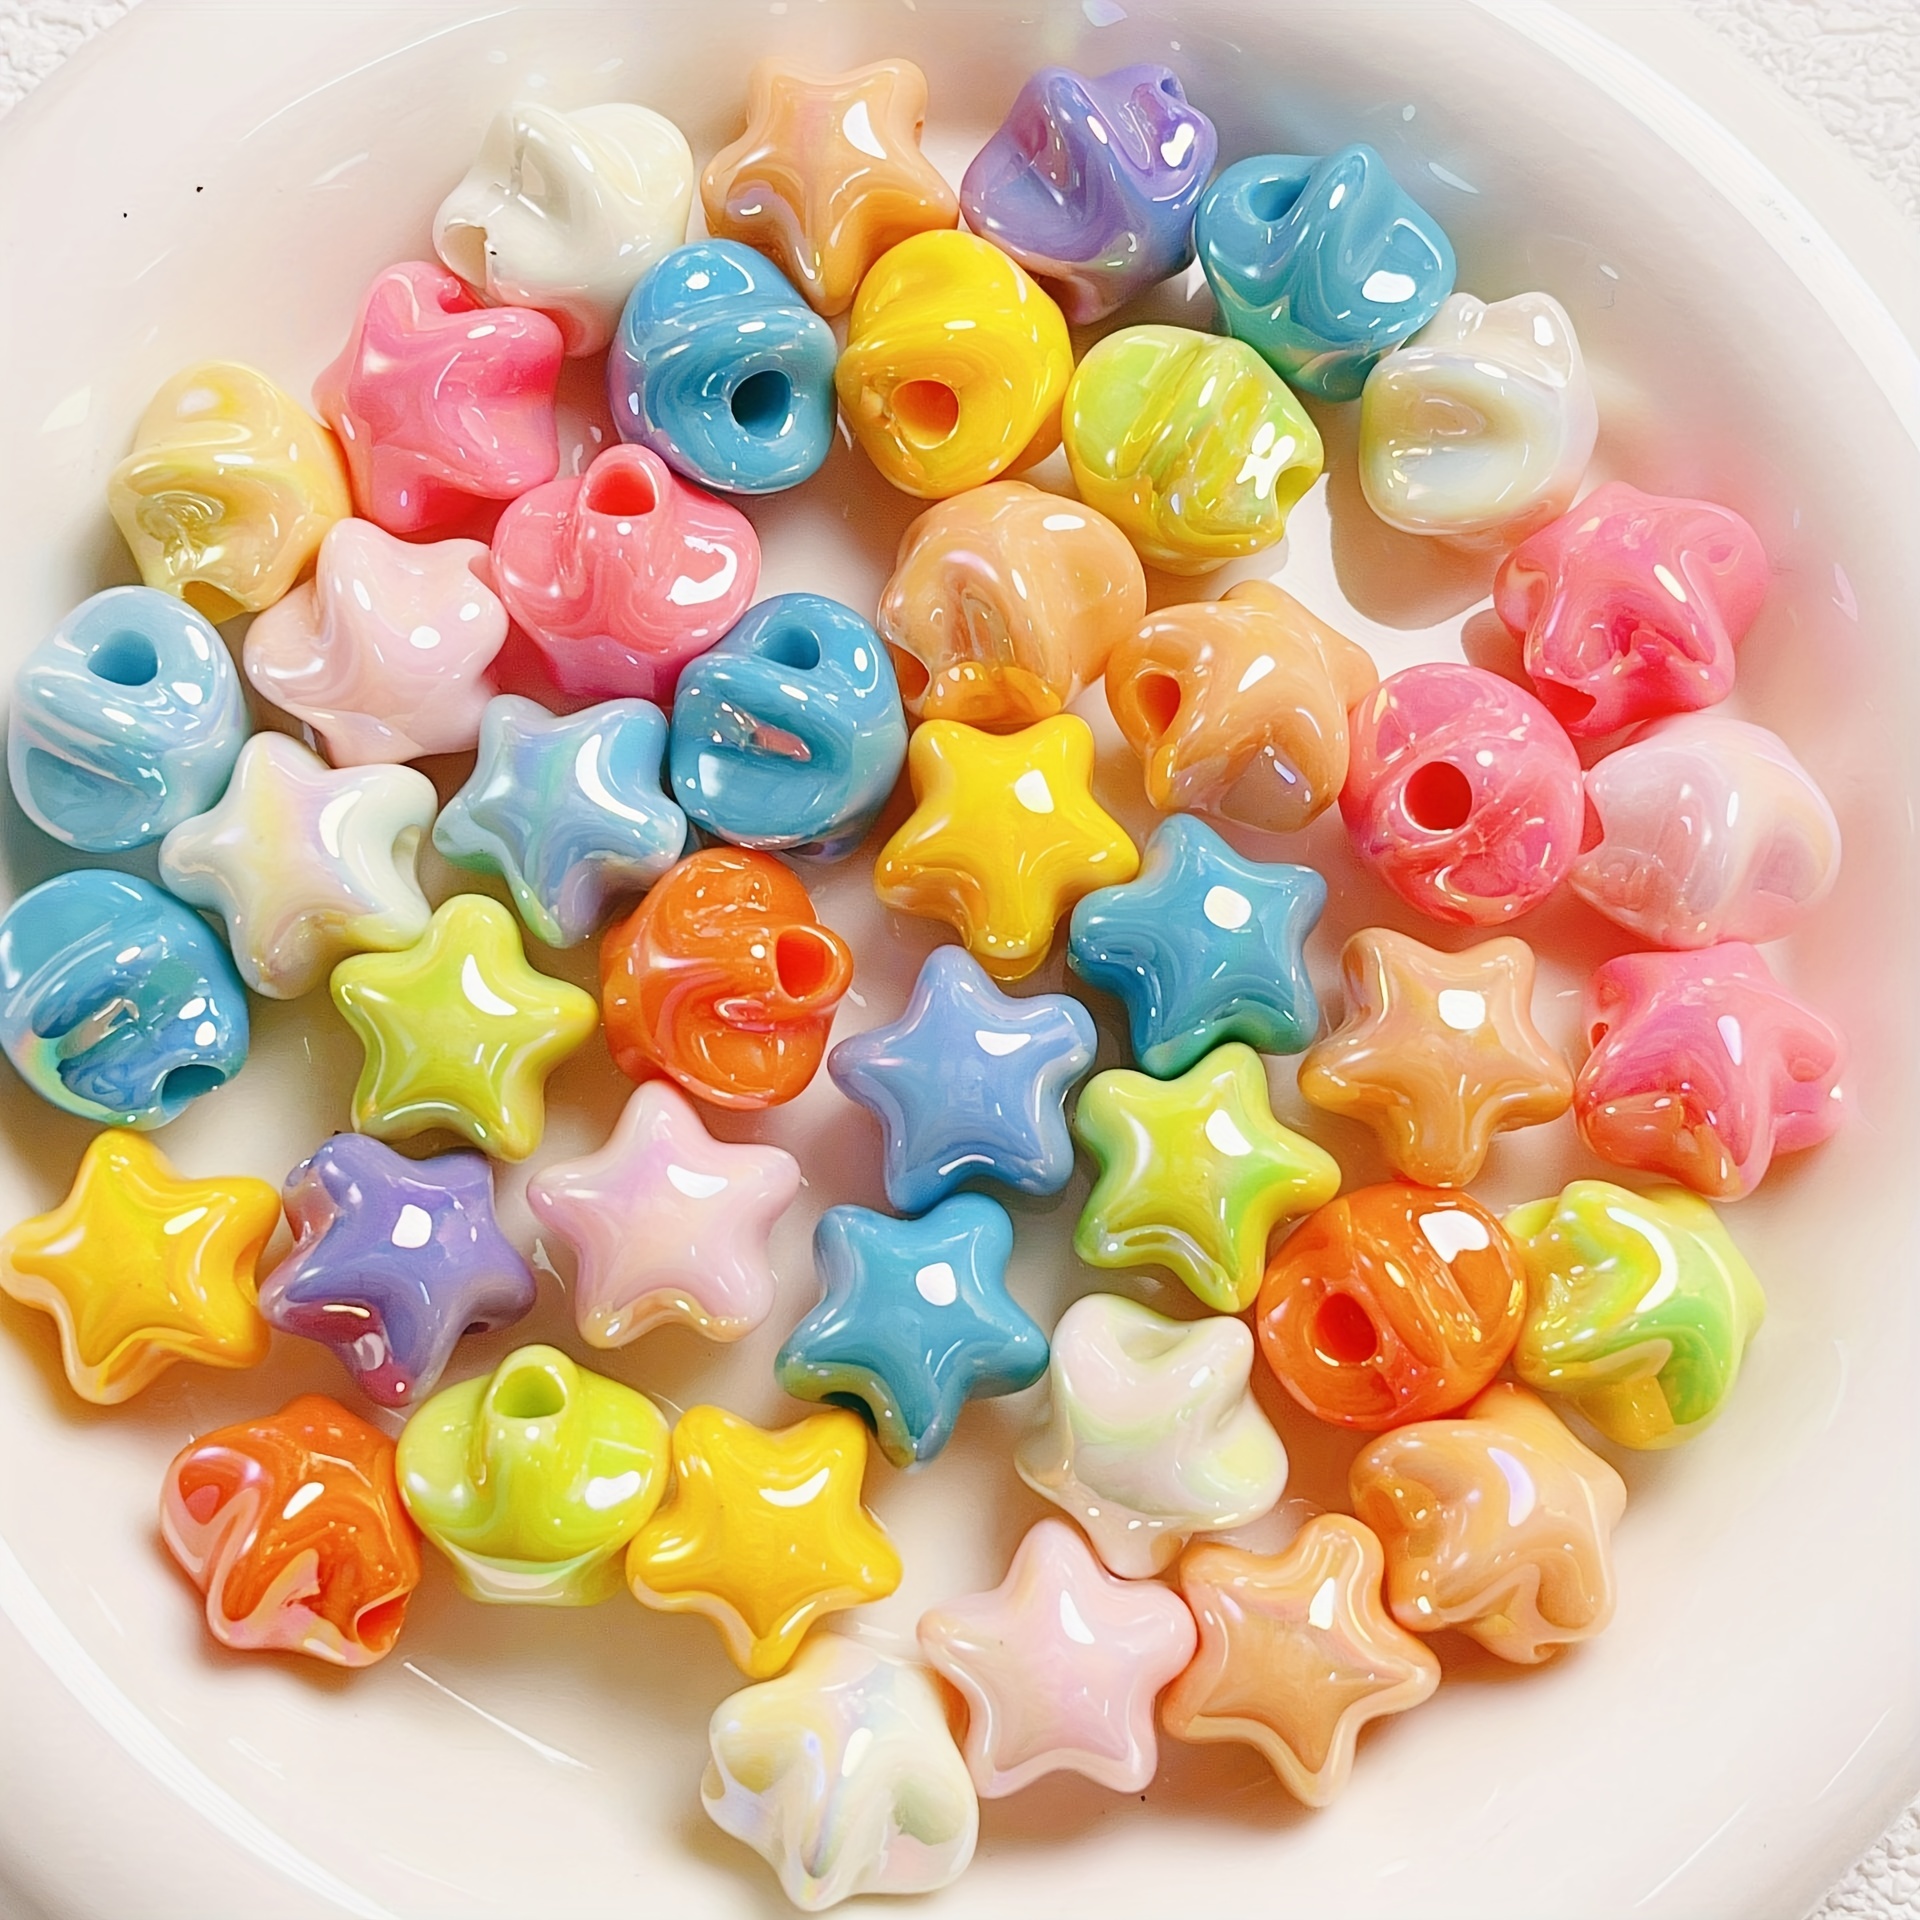  500 Pieces Star Pony Beads Large Hole Beads Multi Color Acrylic  Beads Bracelet Kawaii Rainbow Necklace Jewelry Making Craft Beads for  Christmas Valentine's Day Present